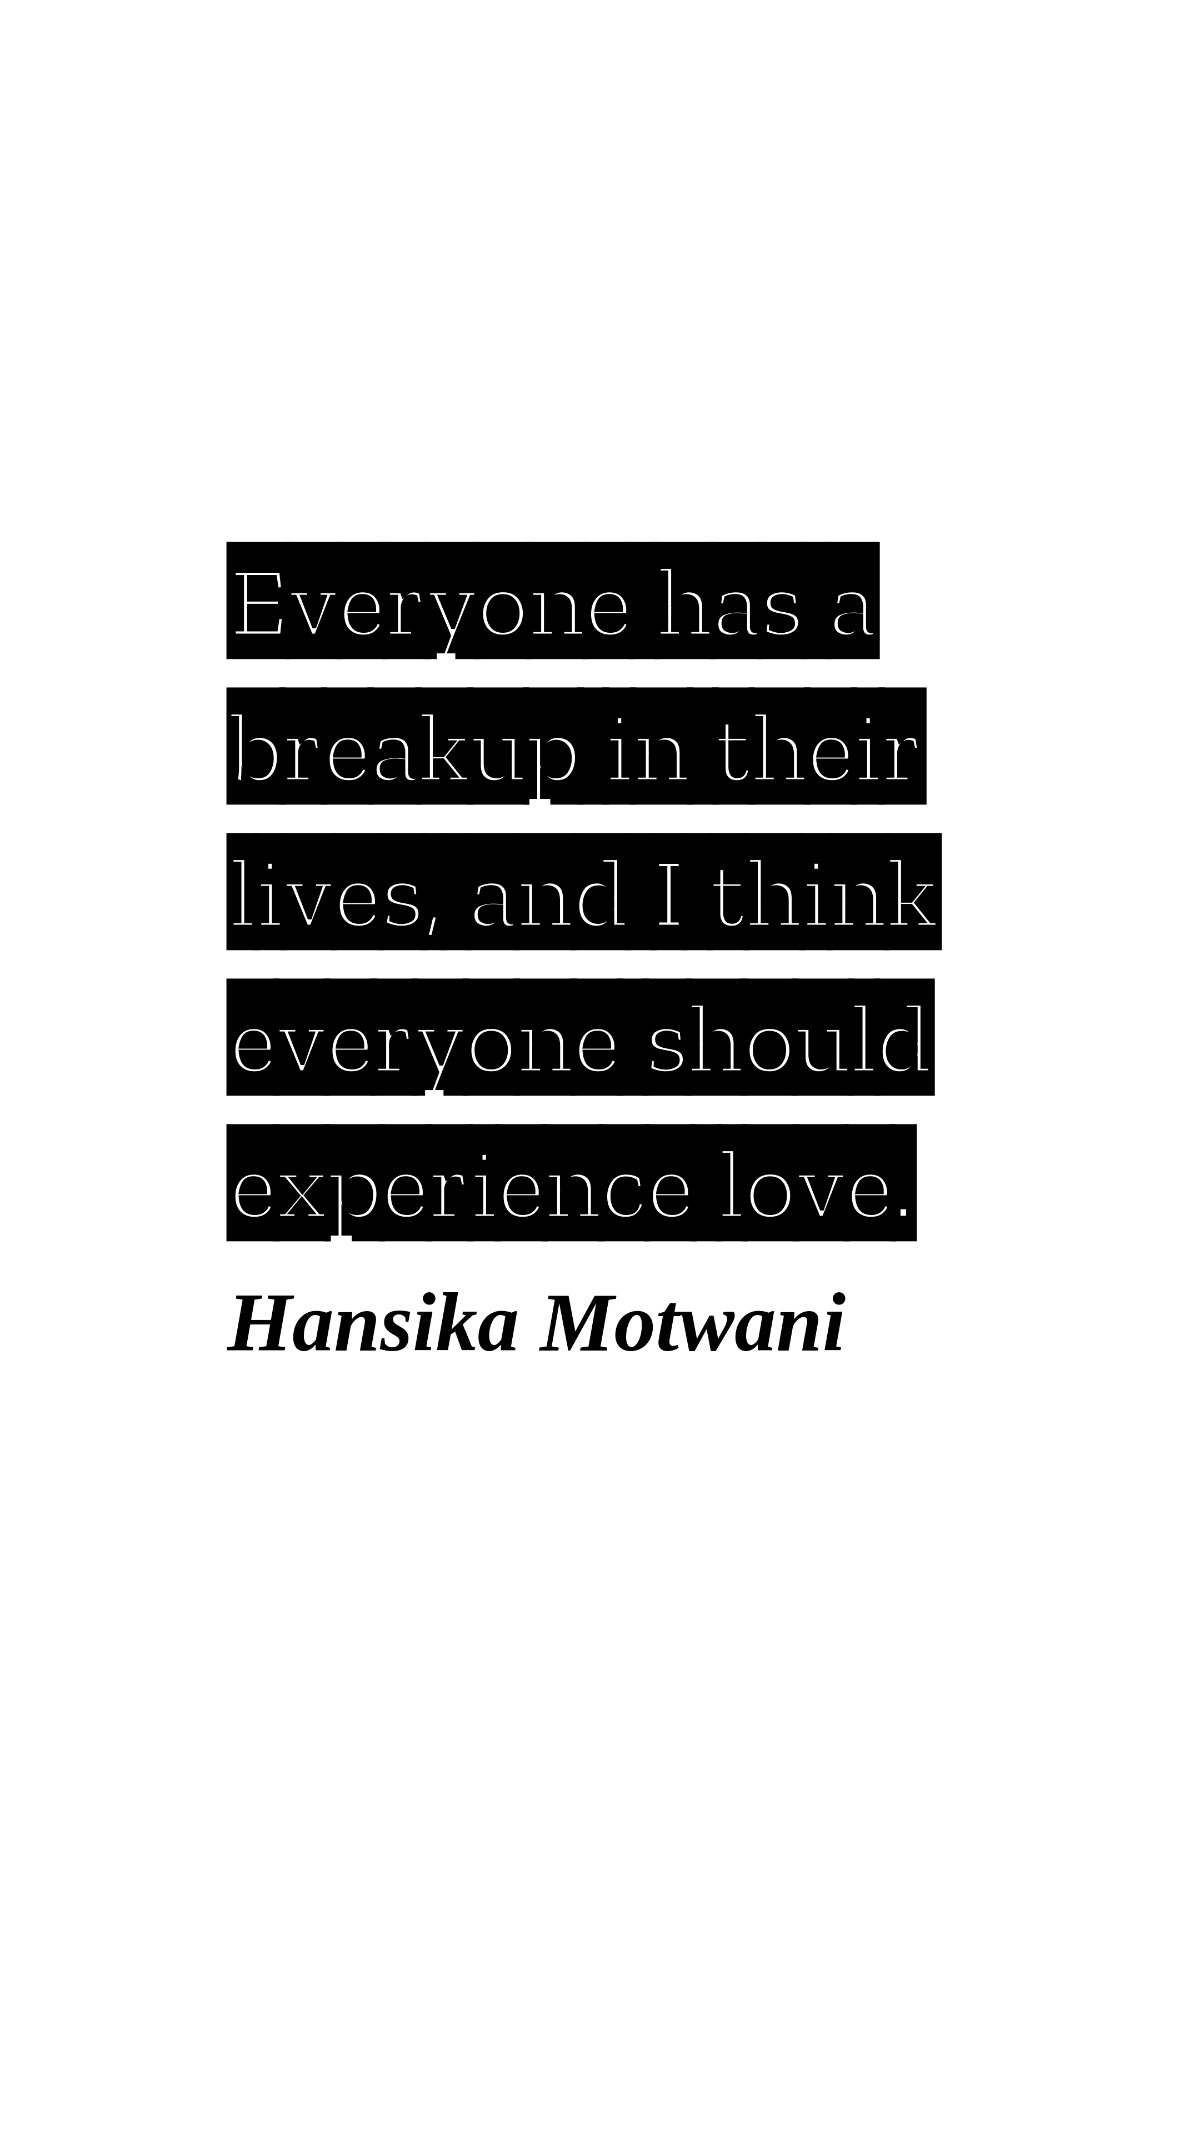 Hansika Motwani - Everyone has a breakup in their lives, and I think everyone should experience love.